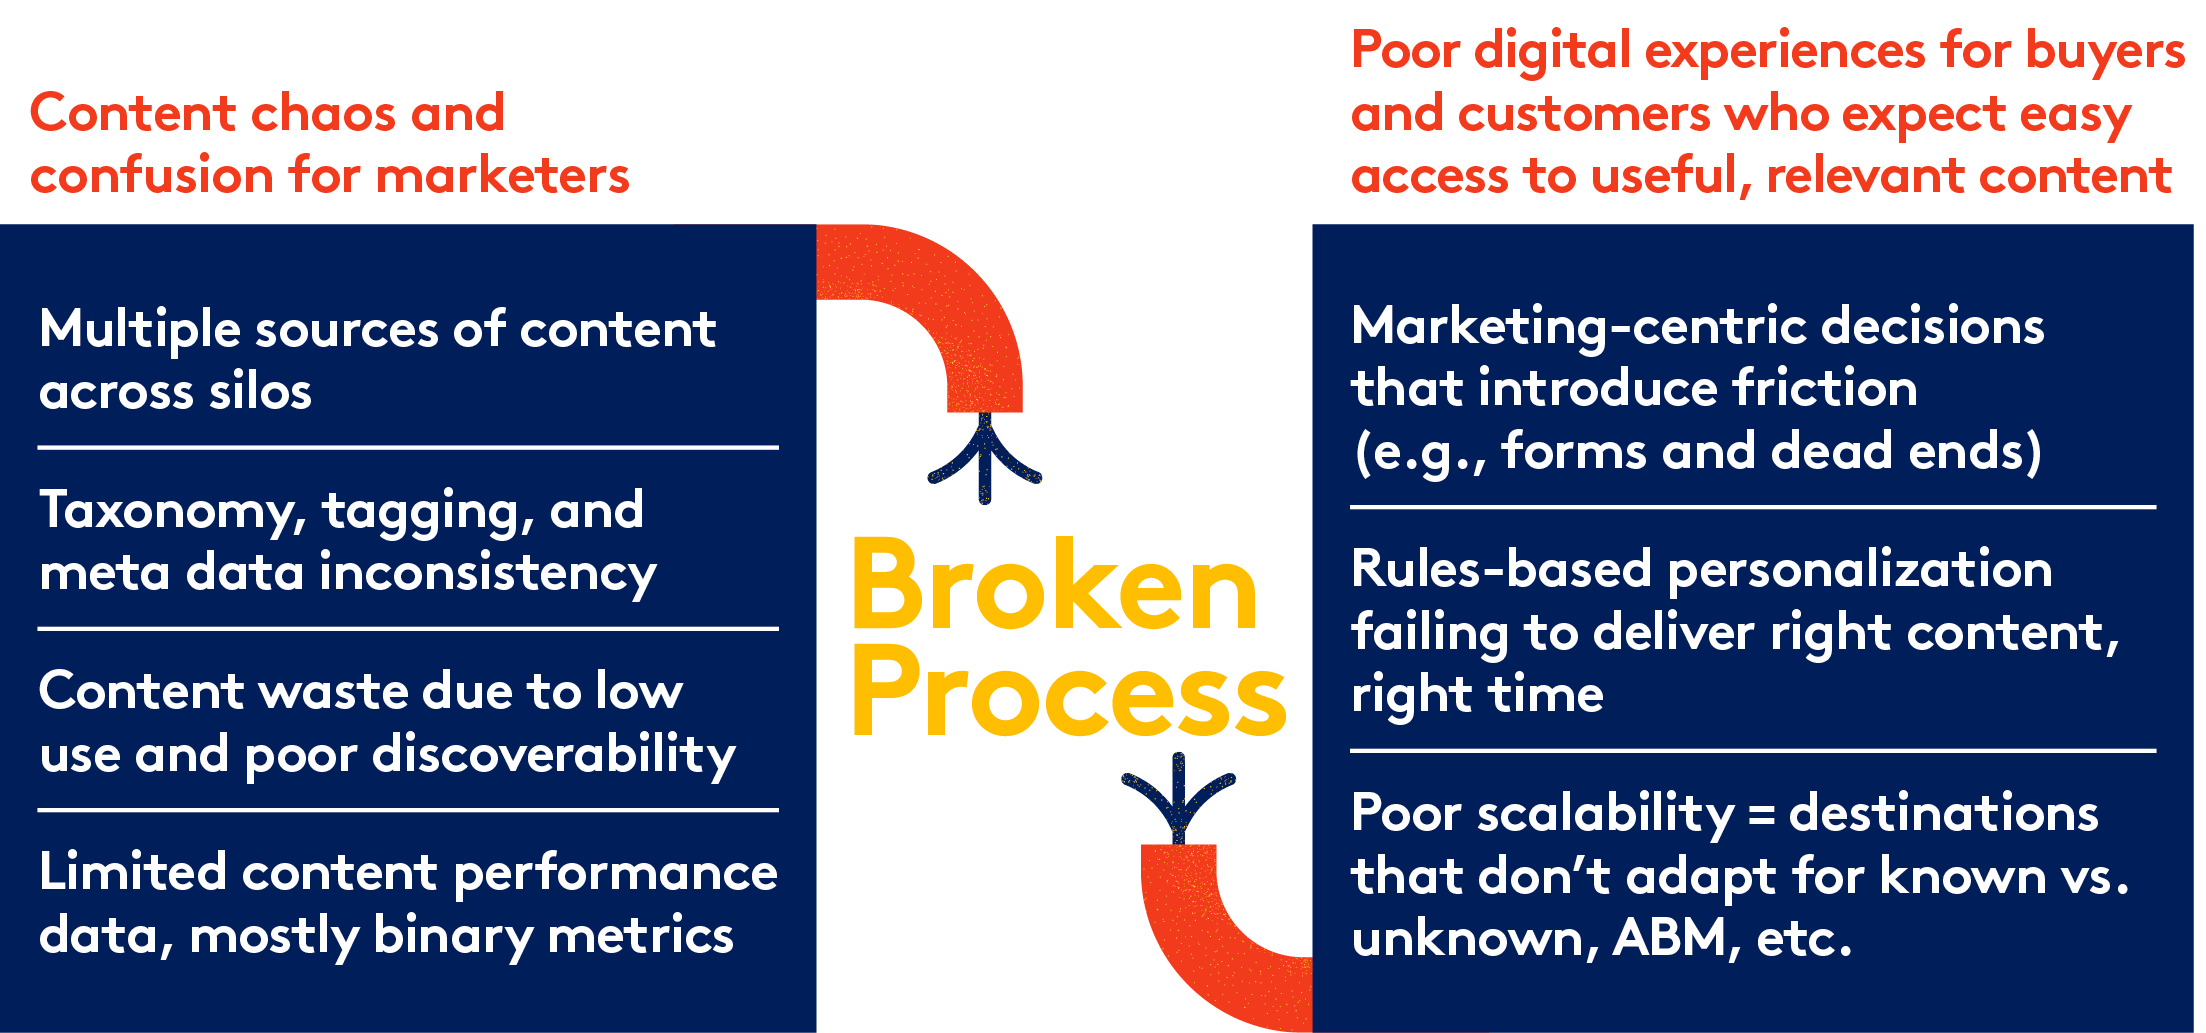 Chart illustrating the outcome of broken process behind B2B content: Chaos and confusion for marketers, poor digital experiences for buyers.